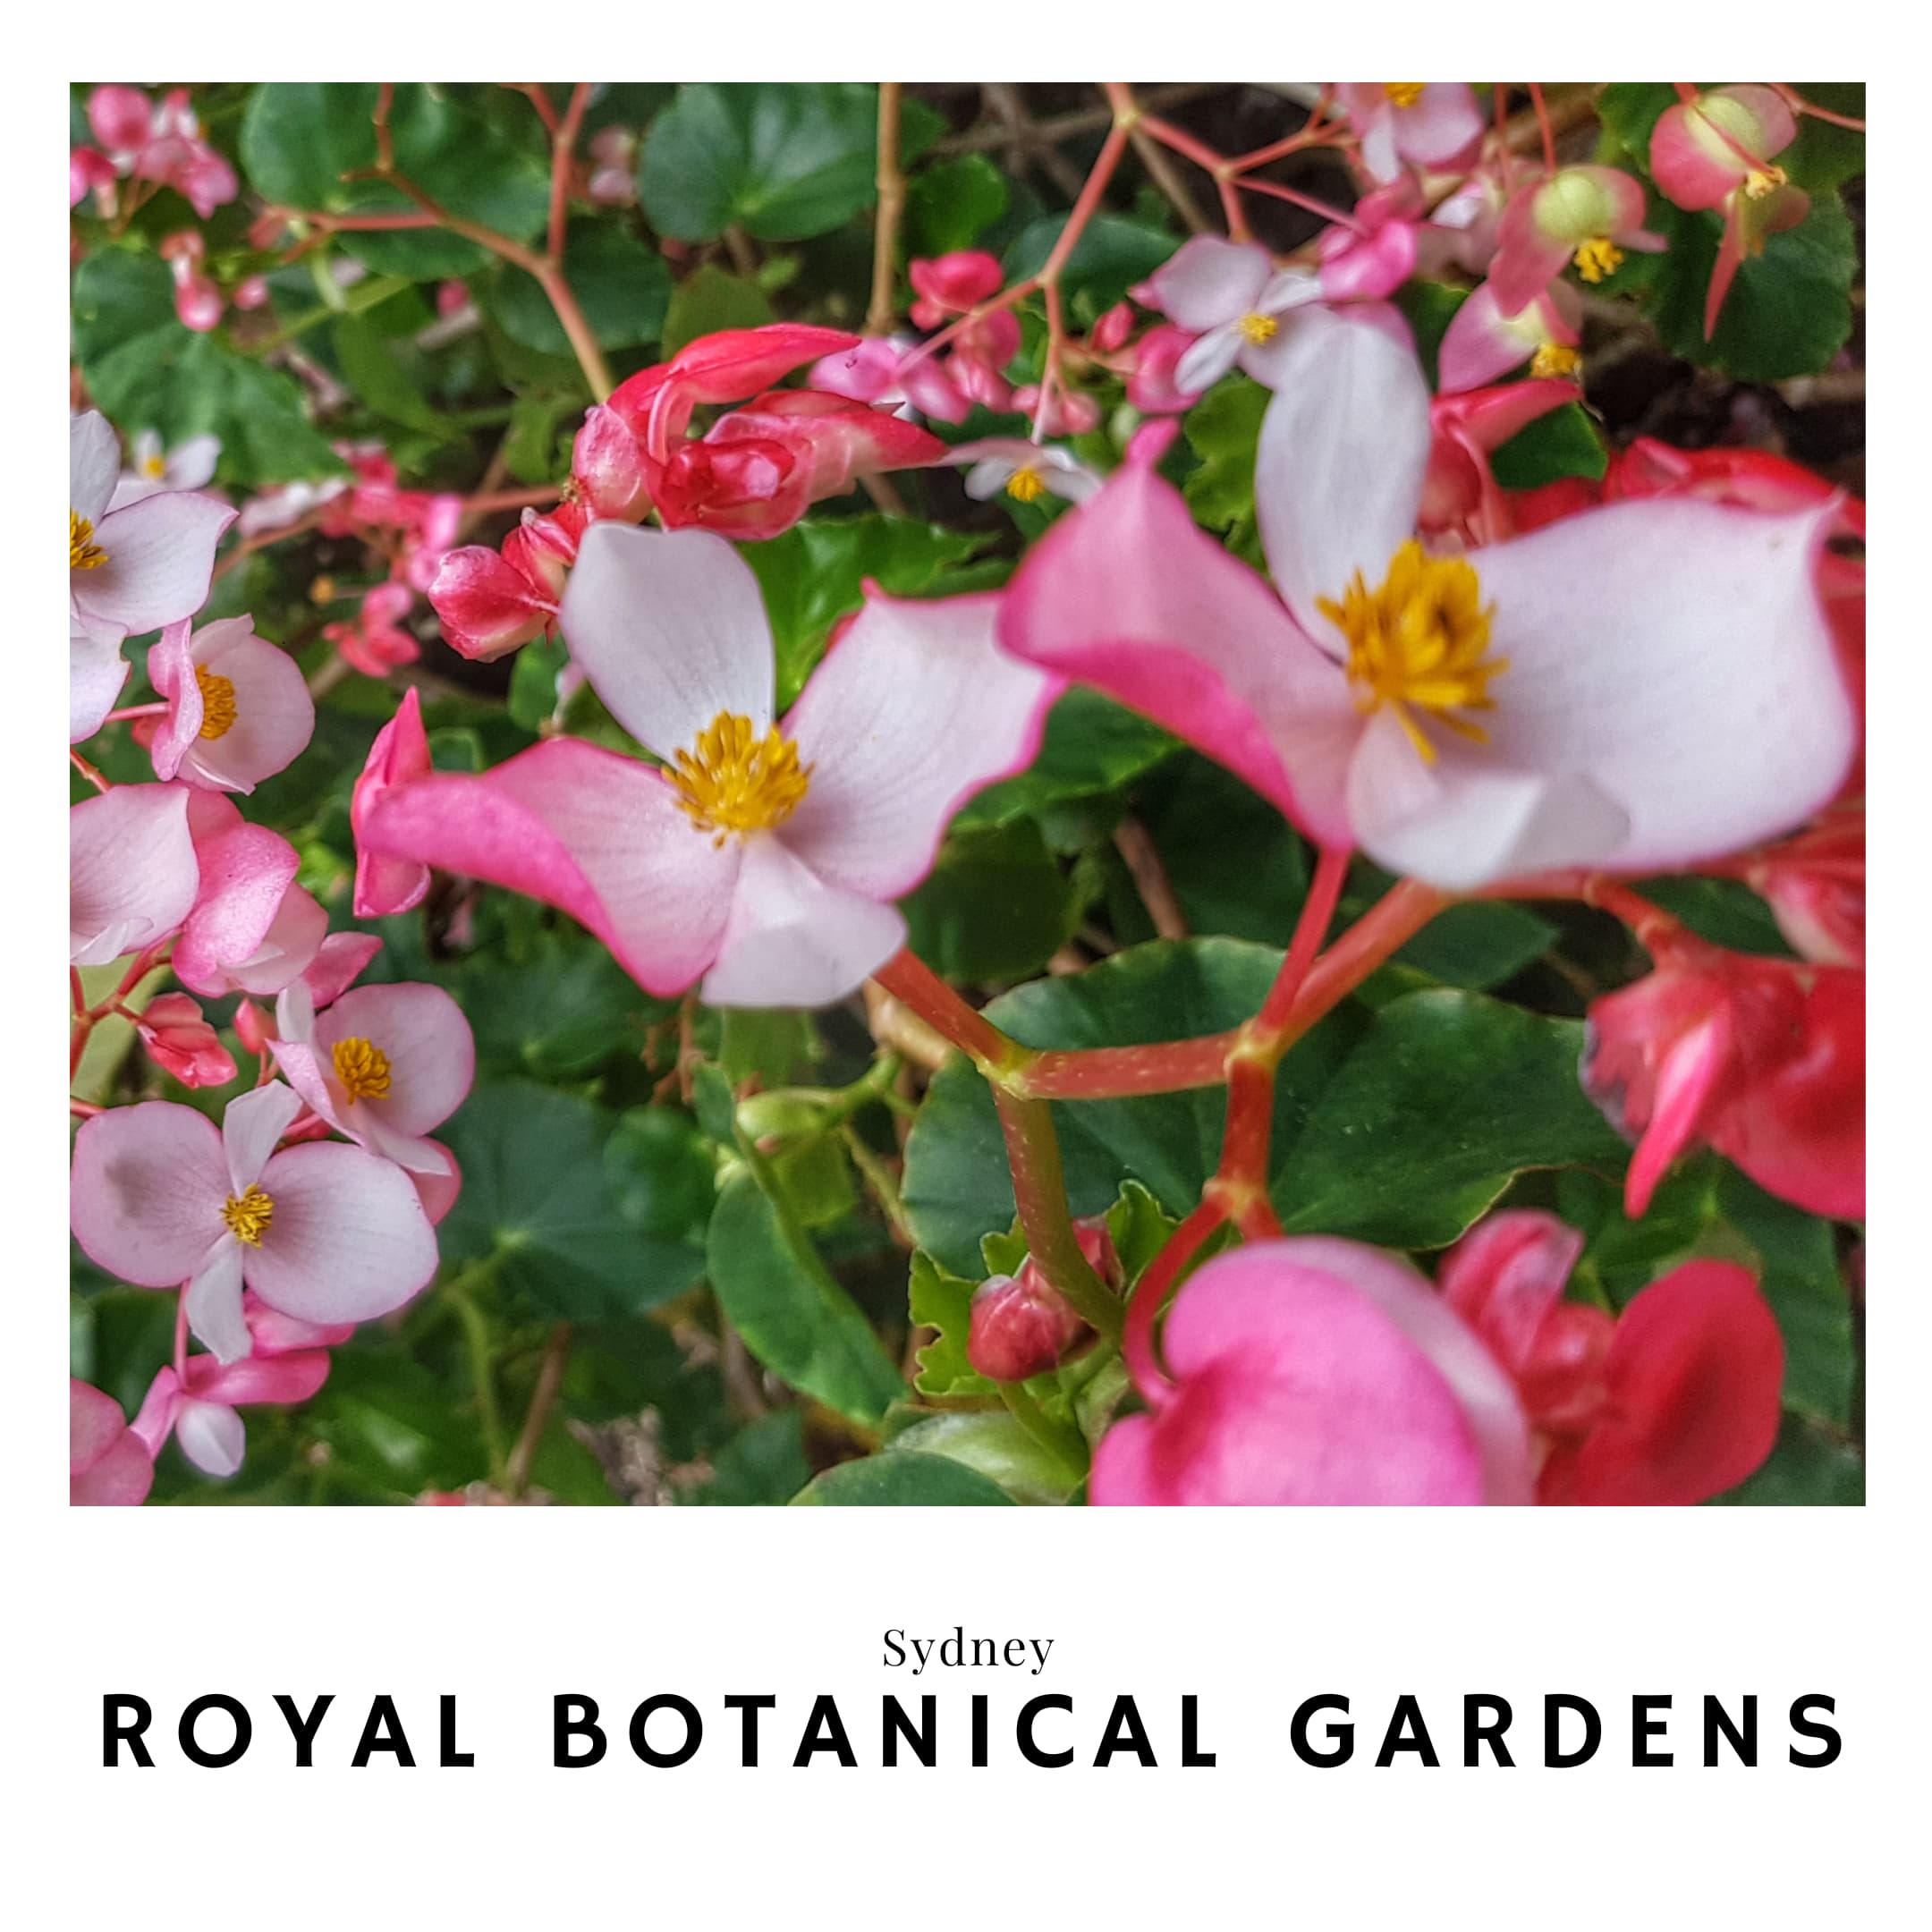 Link to the Royal Botanical Gardens  travel guide in Australia